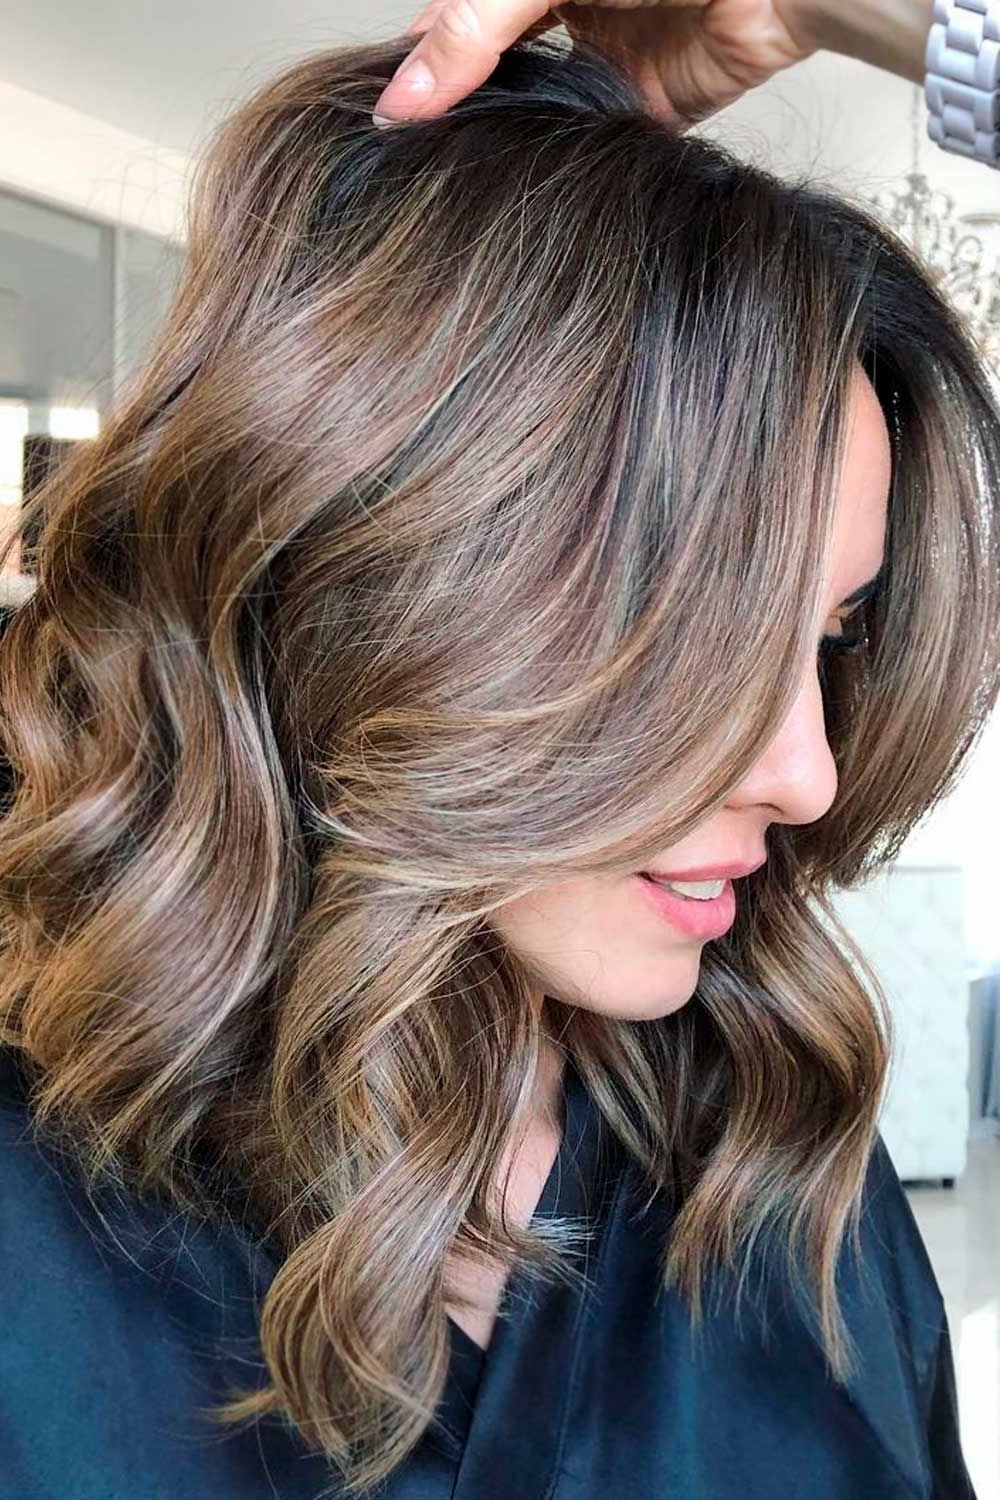 Lovehairstyles (Gallery 20 of 20)